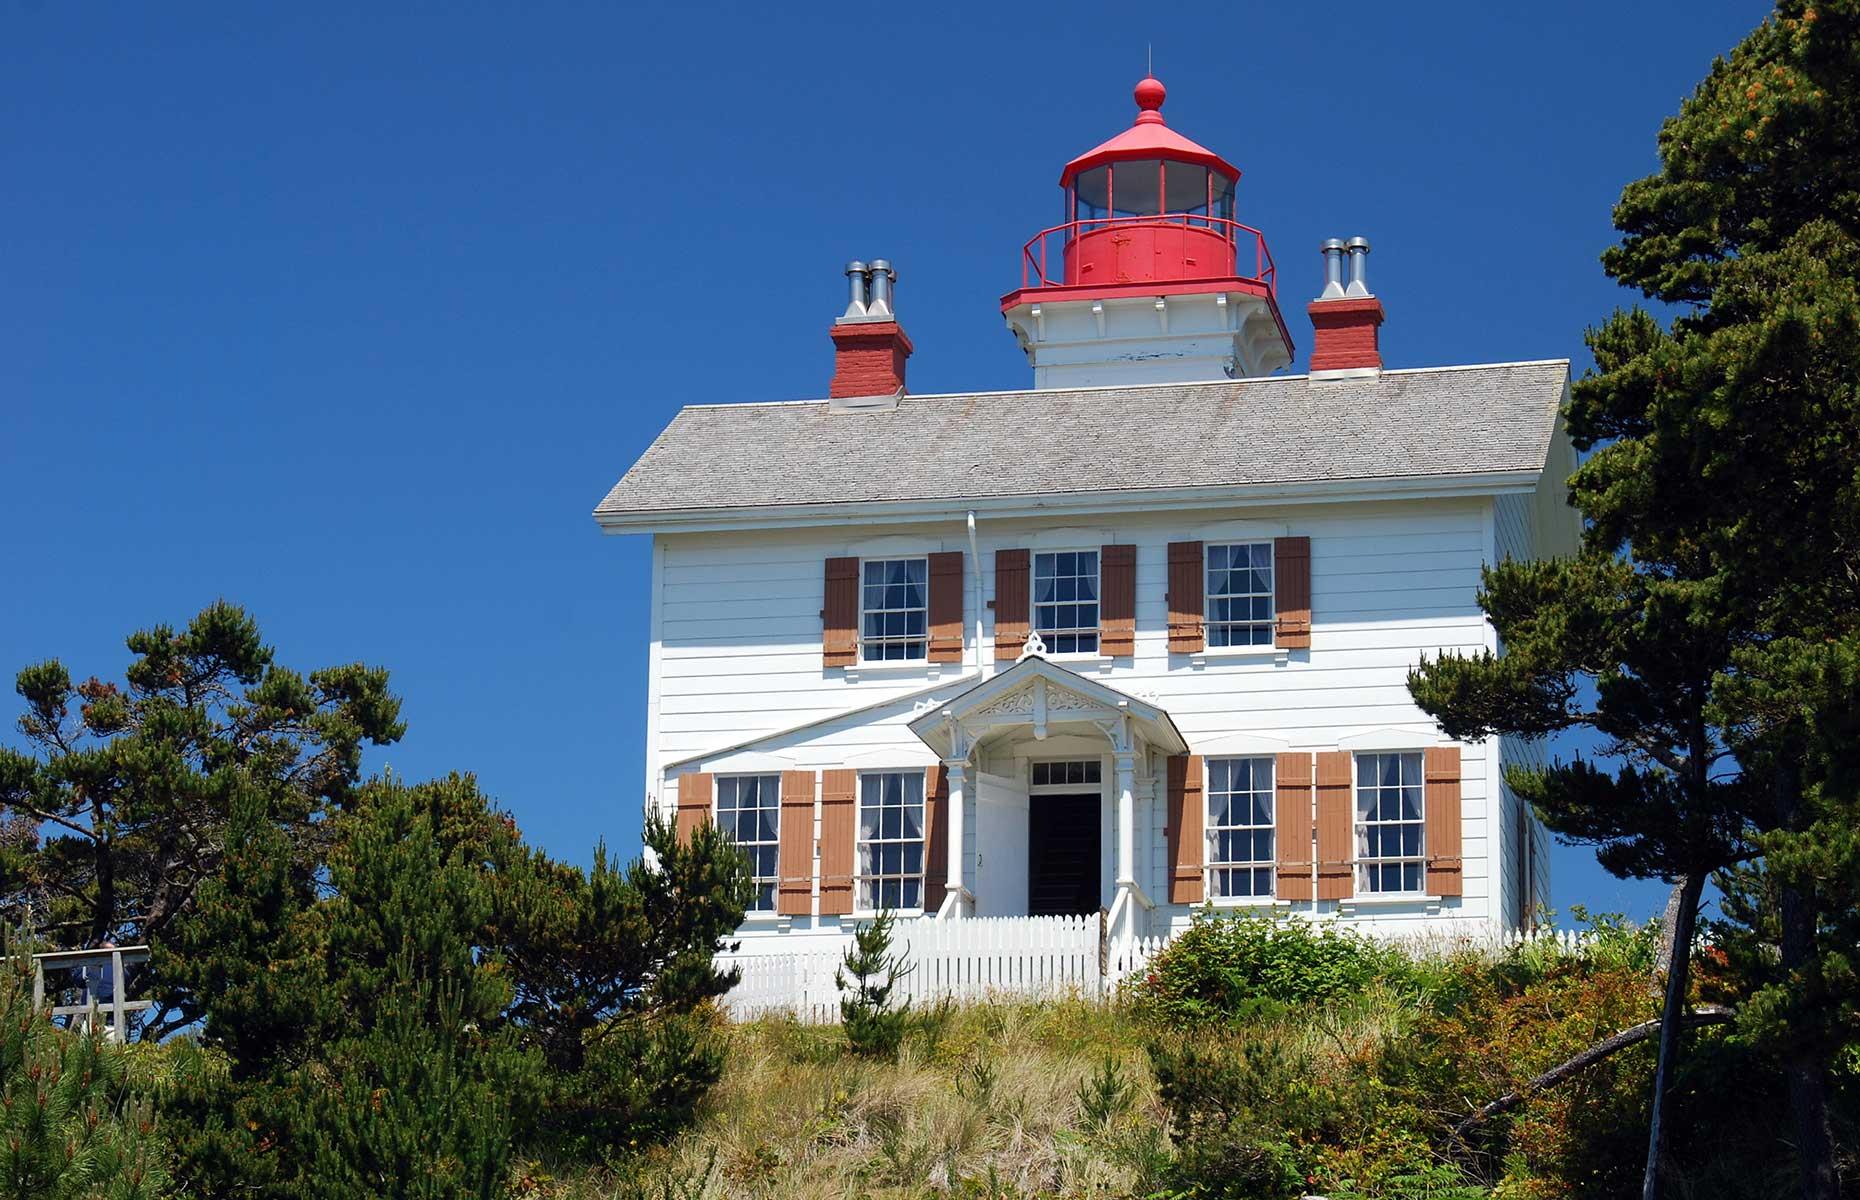 <p>While it might look more like a charming house on the cliff, this is in fact a fully working lighthouse. Built in 1871, soon after the founding of the city of Newport, the quaint Yaquina Bay Lighthouse sits atop a steep bluff at the mouth of the Yaquina River and is alleged to be the oldest structure in the city. Decommissioned in 1874, it was restored as a privately maintained beacon in 1996. </p>  <p><a href="https://www.facebook.com/loveexploringUK?utm_source=msn&utm_medium=social&utm_campaign=front"><strong>Love this? Follow our Facebook page for more travel inspiration</strong></a></p>